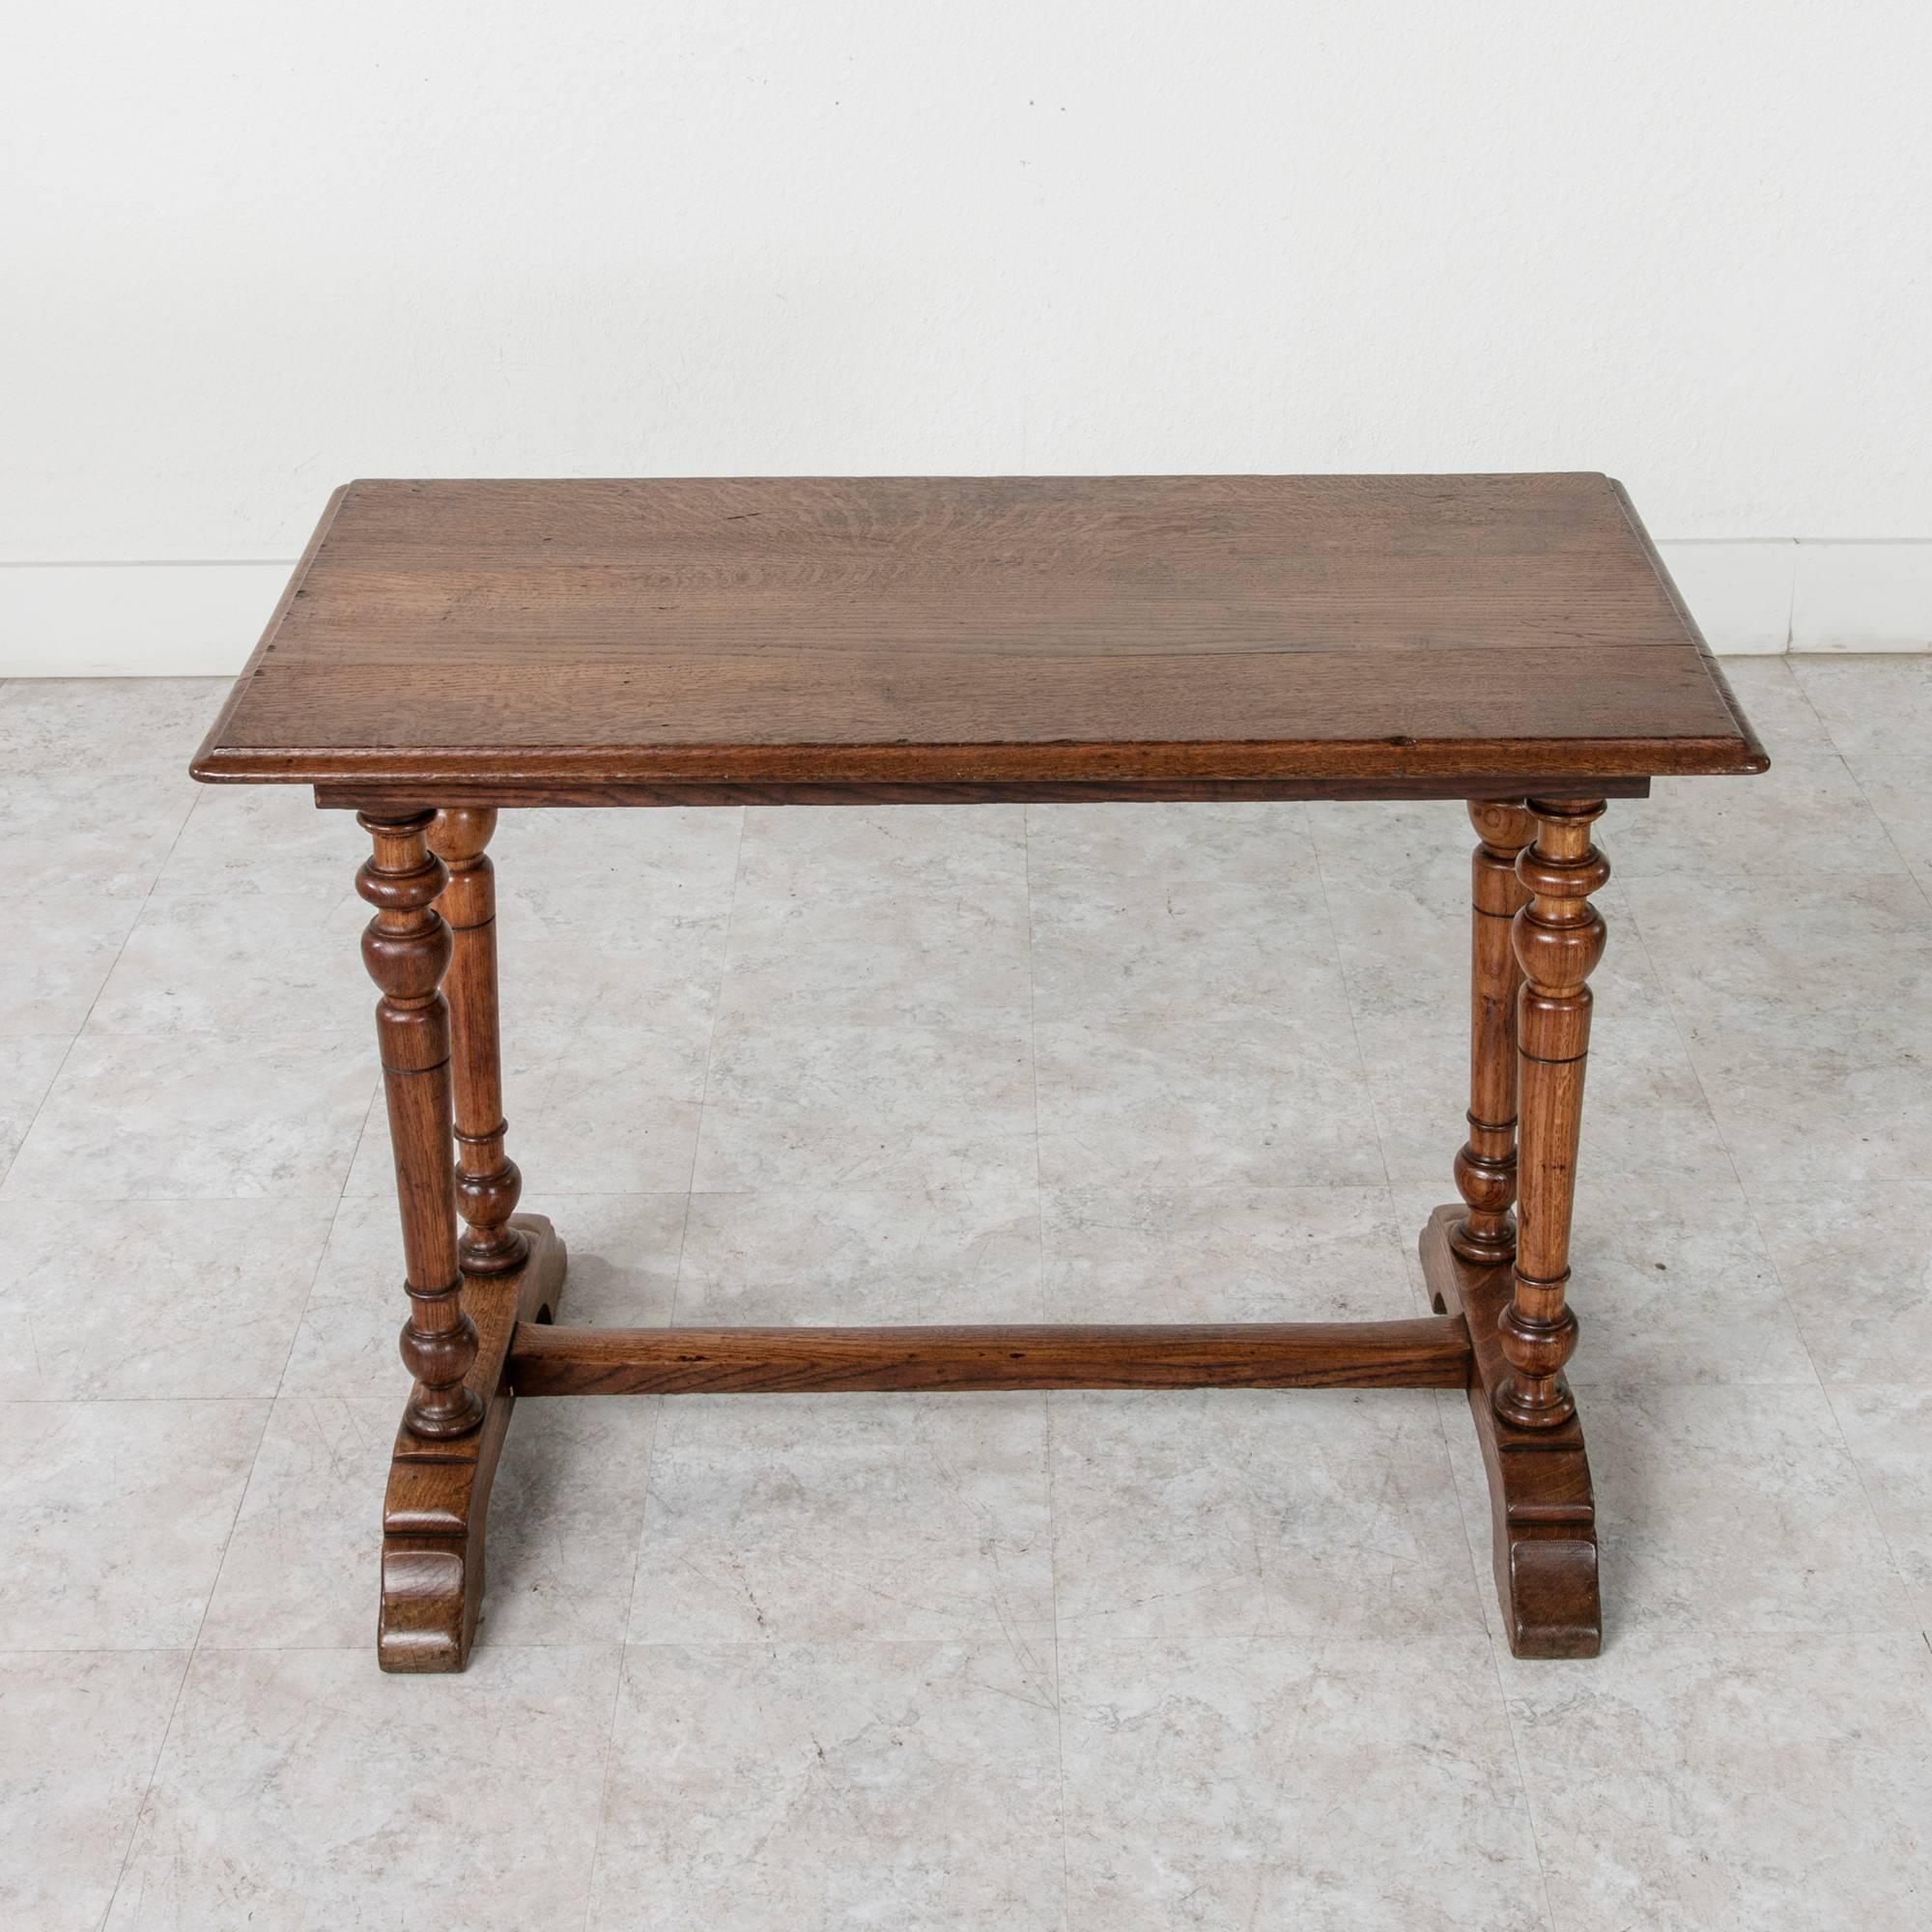 A bistro table? A breakfast table? A writing desk? This circa 1930 French oak table is all three. Its solid construction is perfect for a game of dominoes, even for the most energetic of players, but its versatility also lends itself to use in a